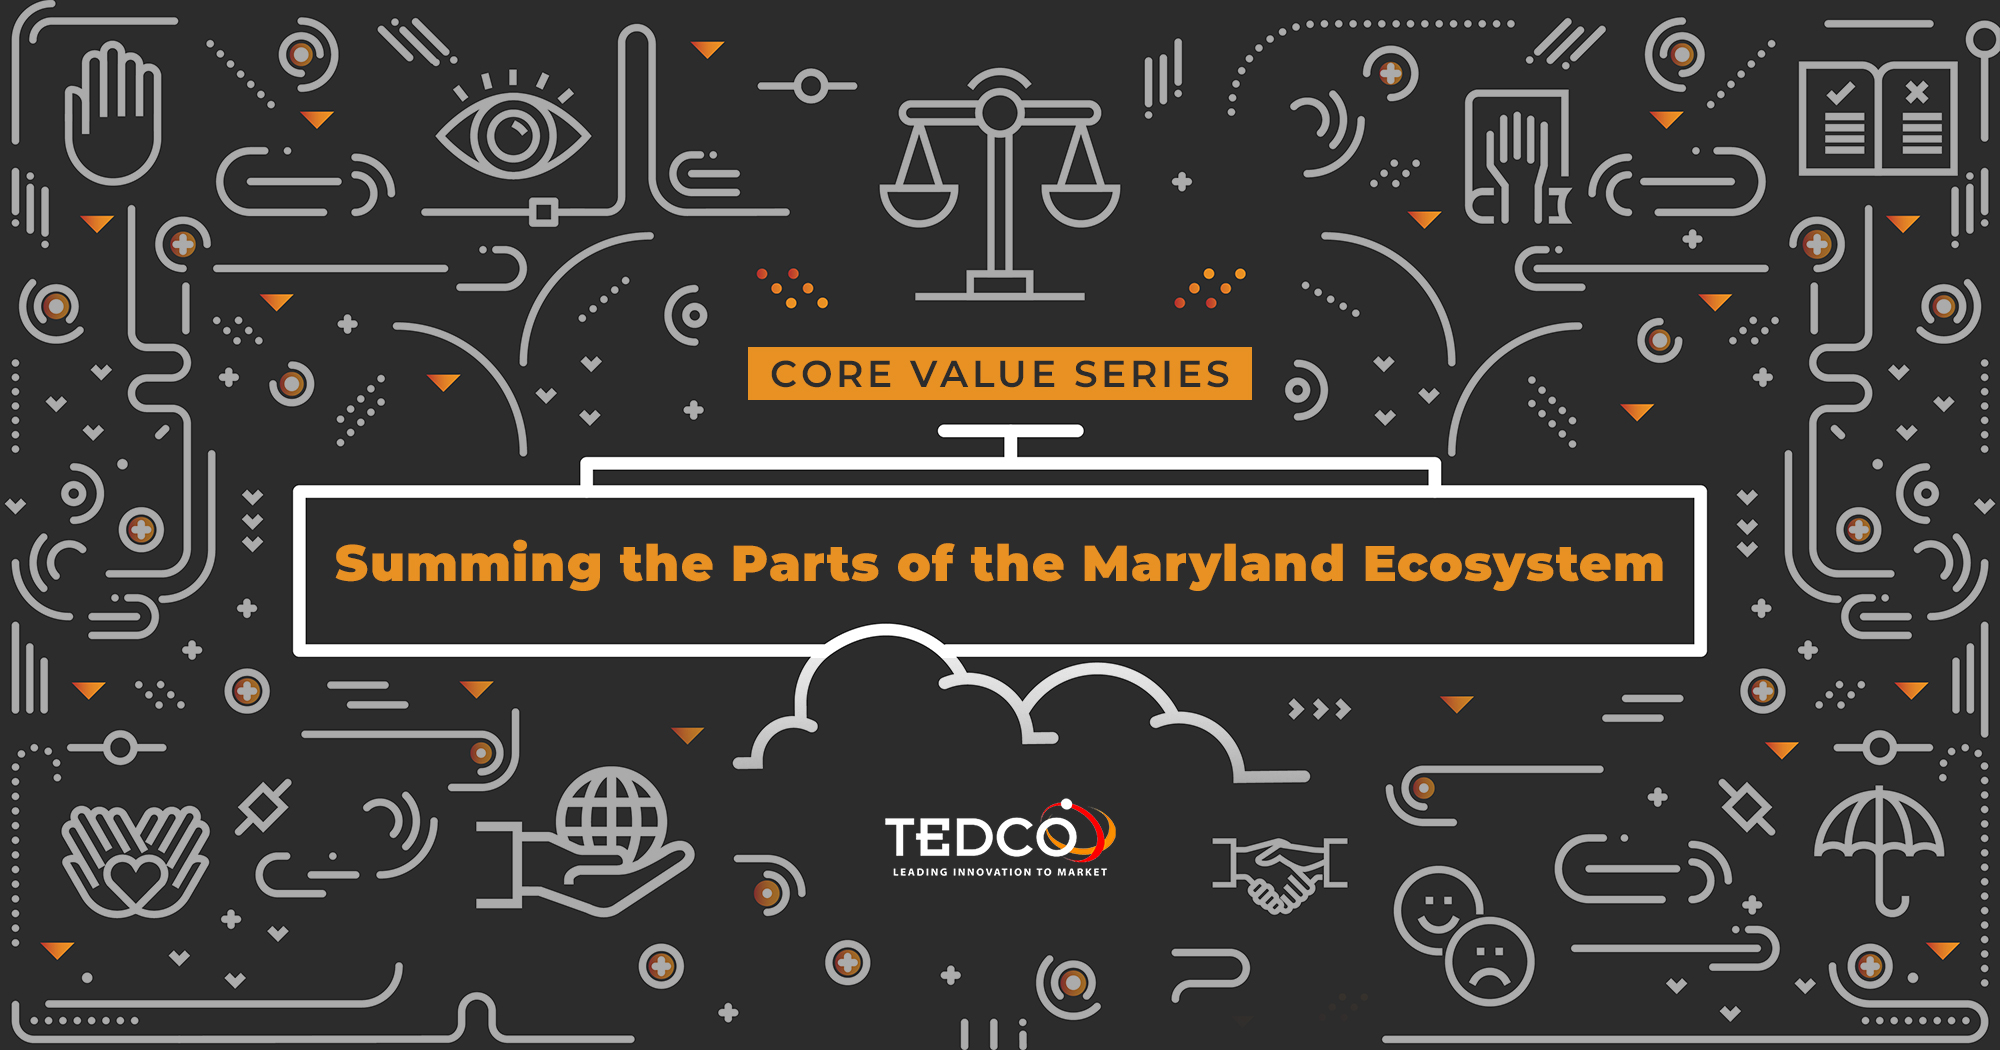 Summing the Parts of the Maryland Ecosystem